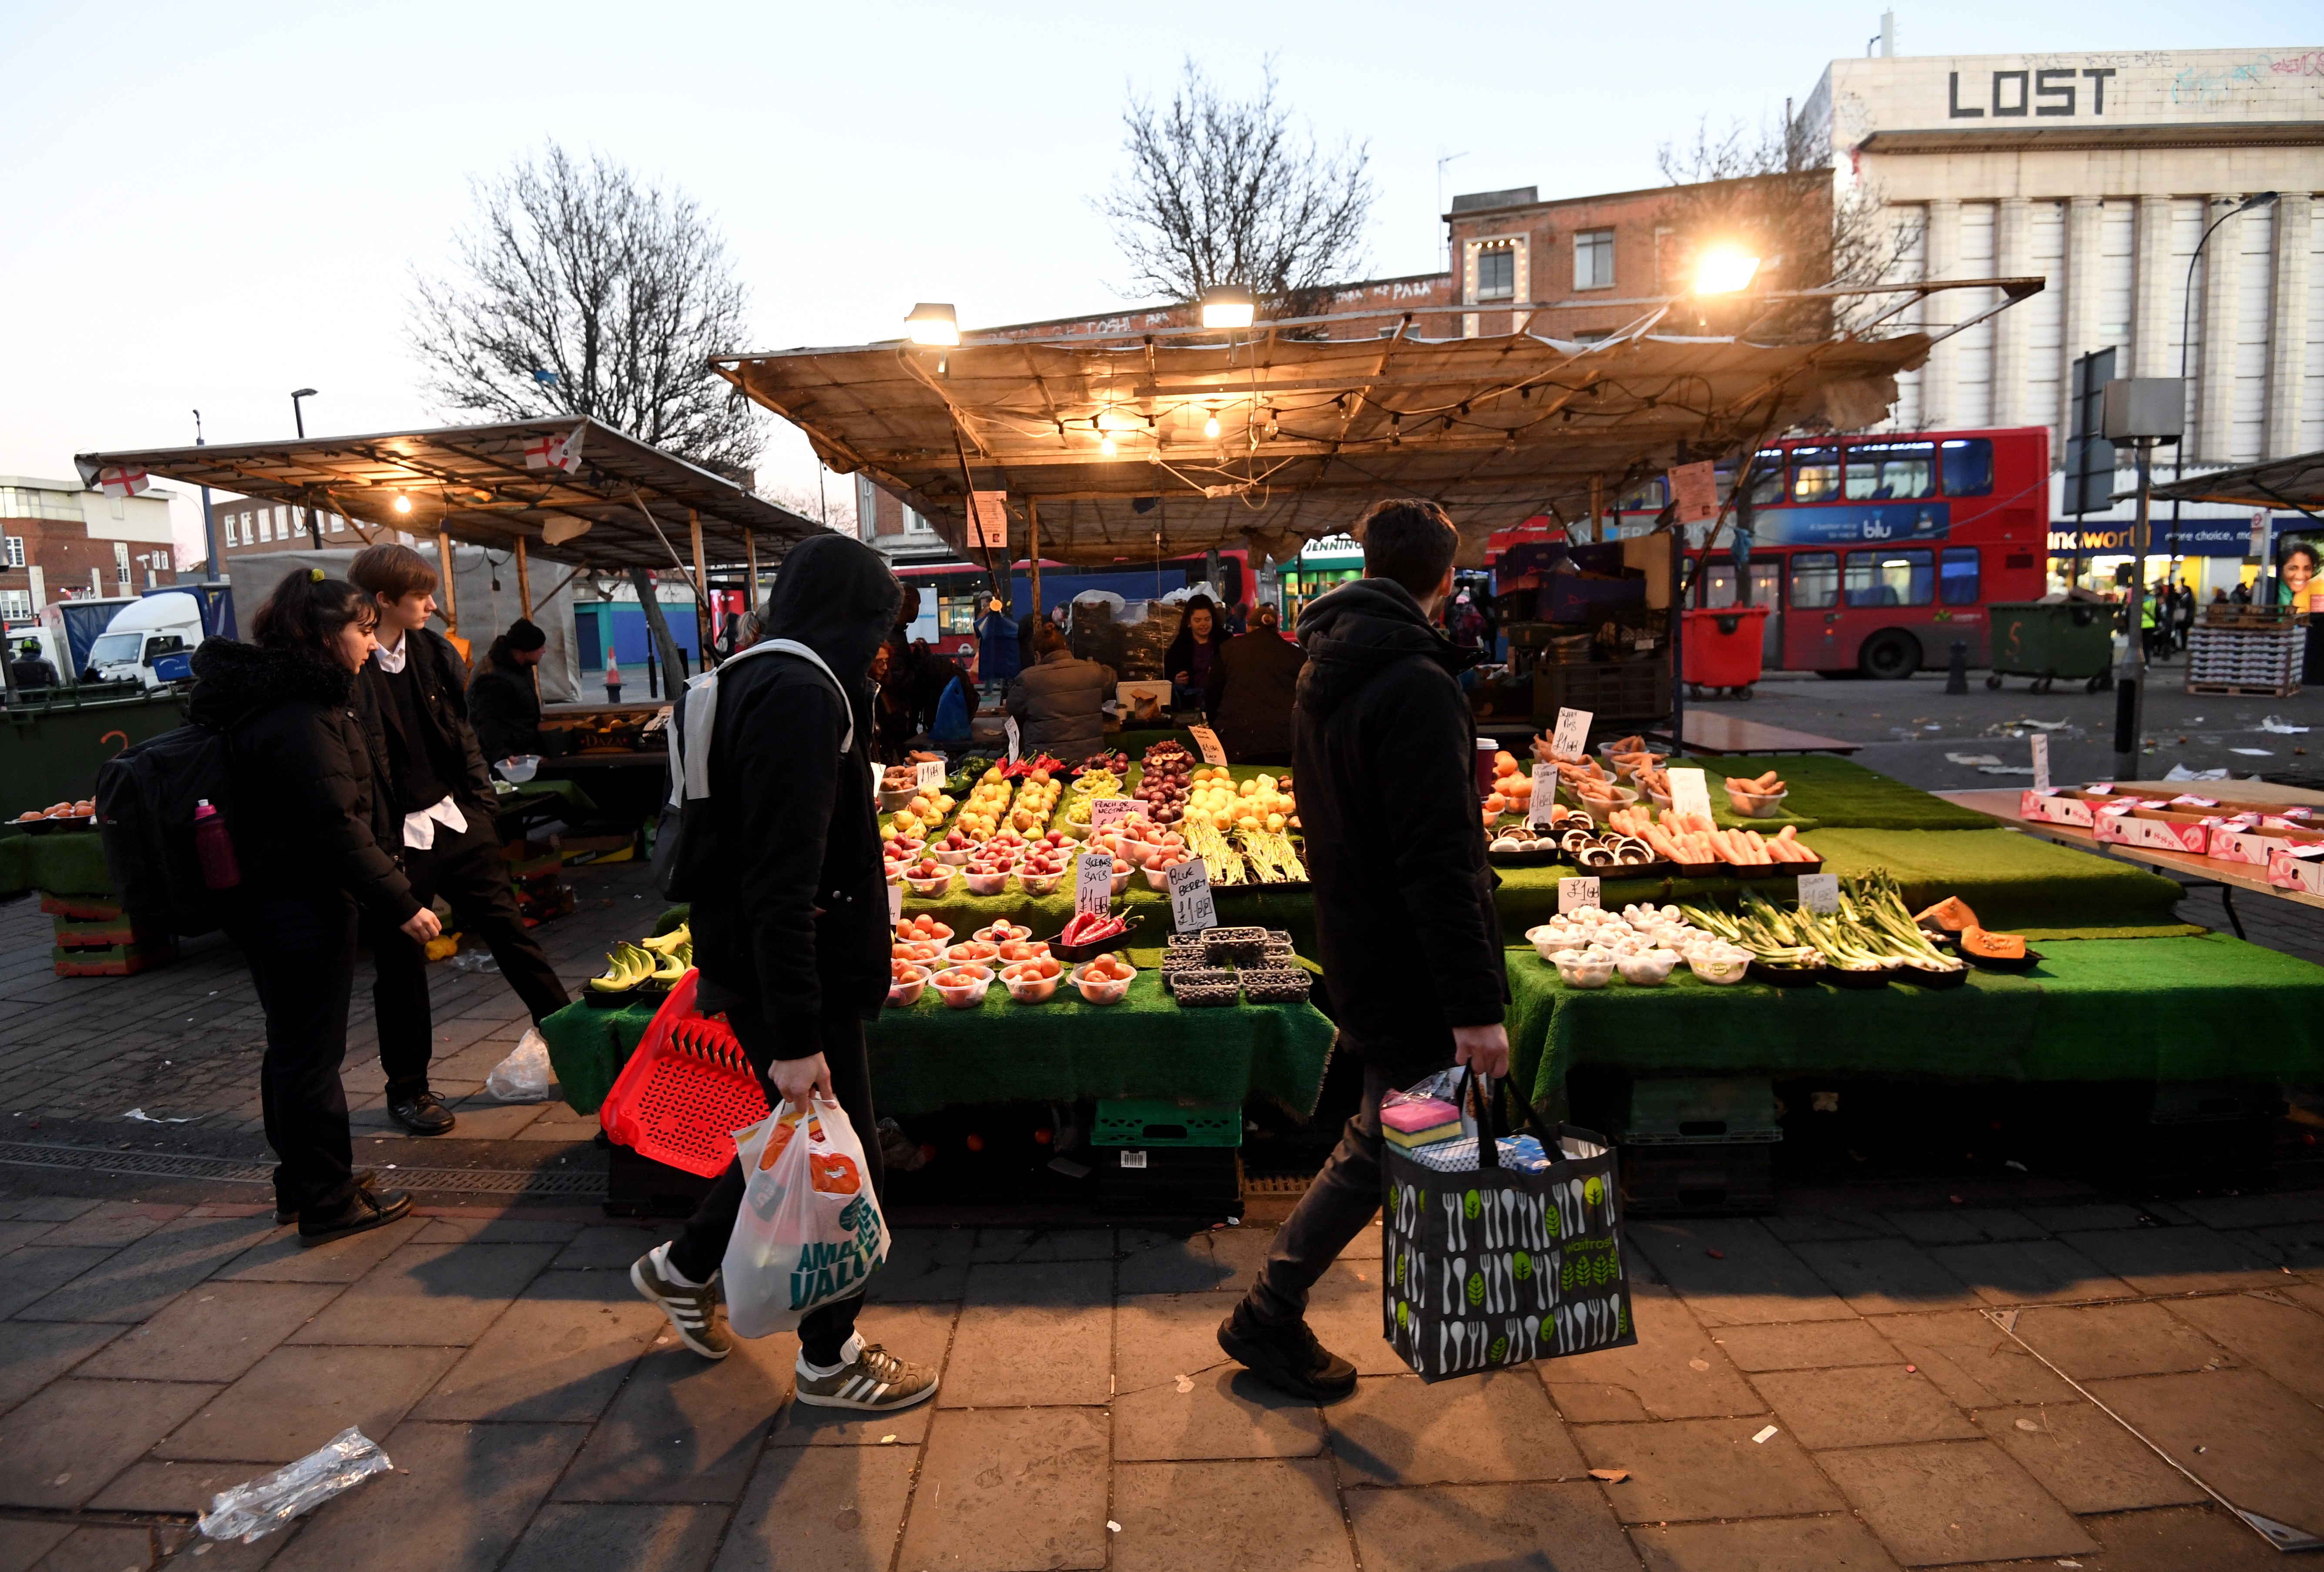 Shoppers walk by a vegetable stand at the Lewisham market in London on Monday. Photo: EPA-EFE